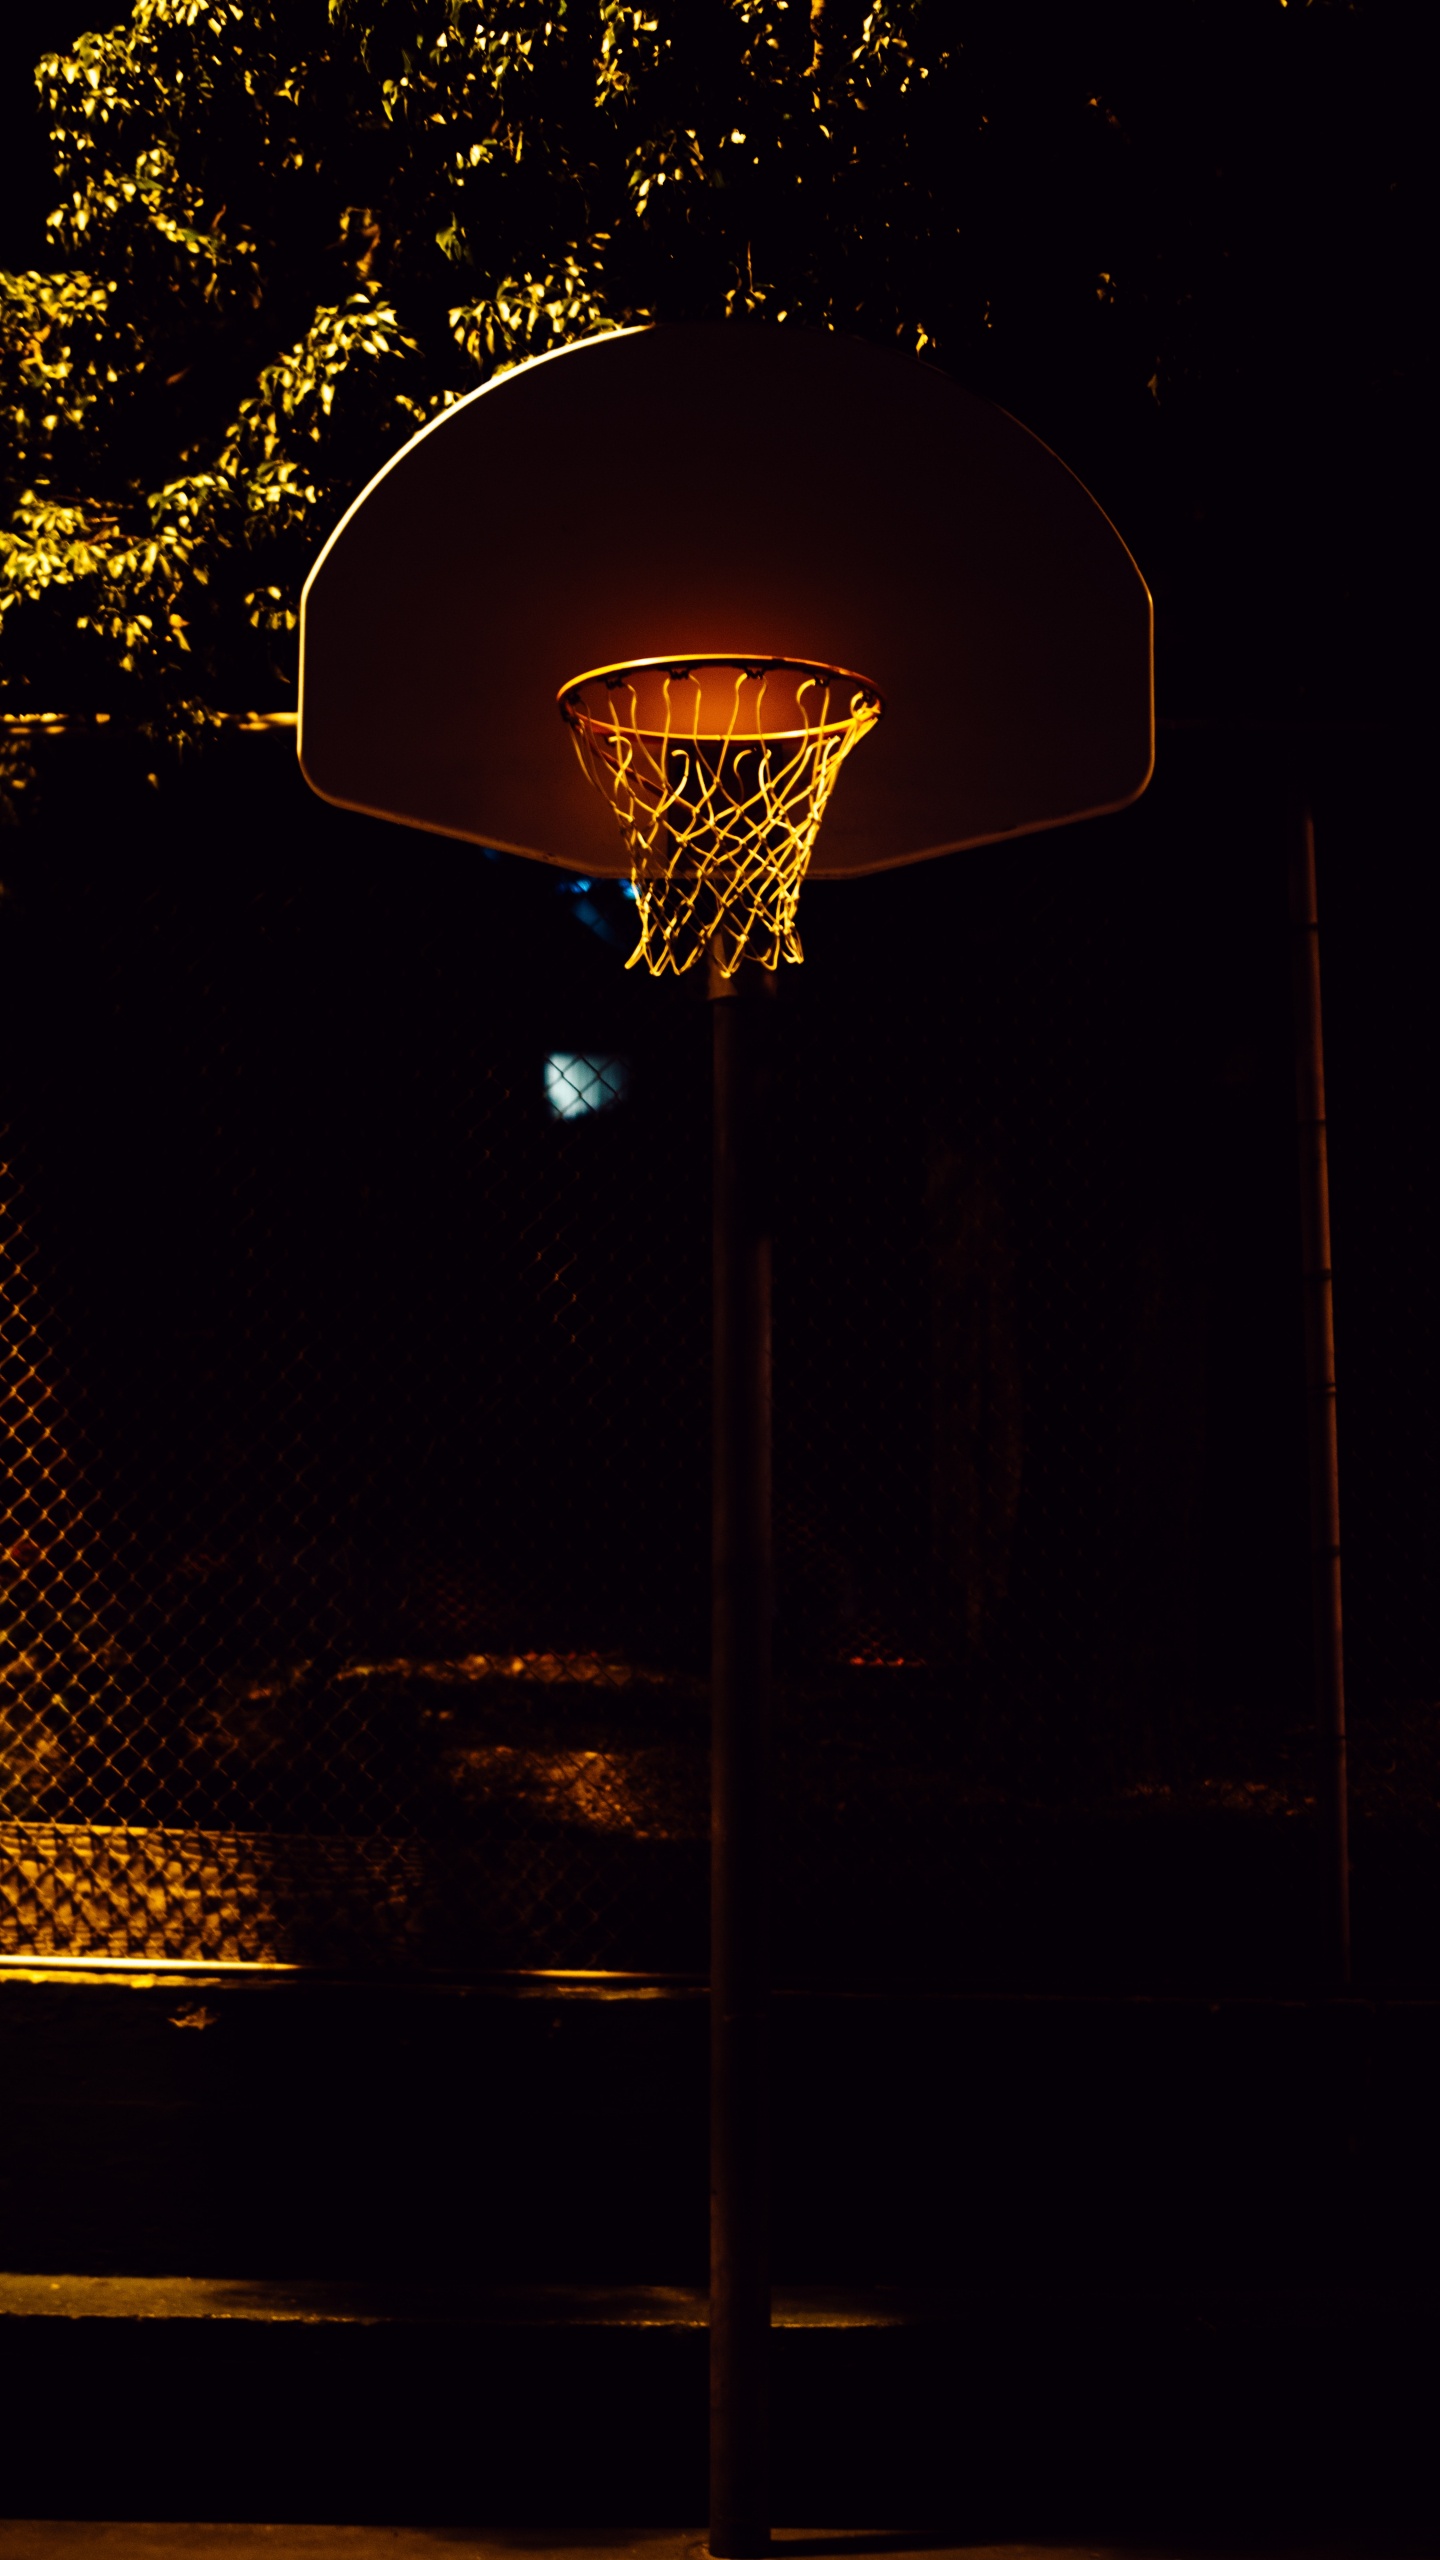 Basketball Hoop With Light Turned on During Night Time. Wallpaper in 1440x2560 Resolution